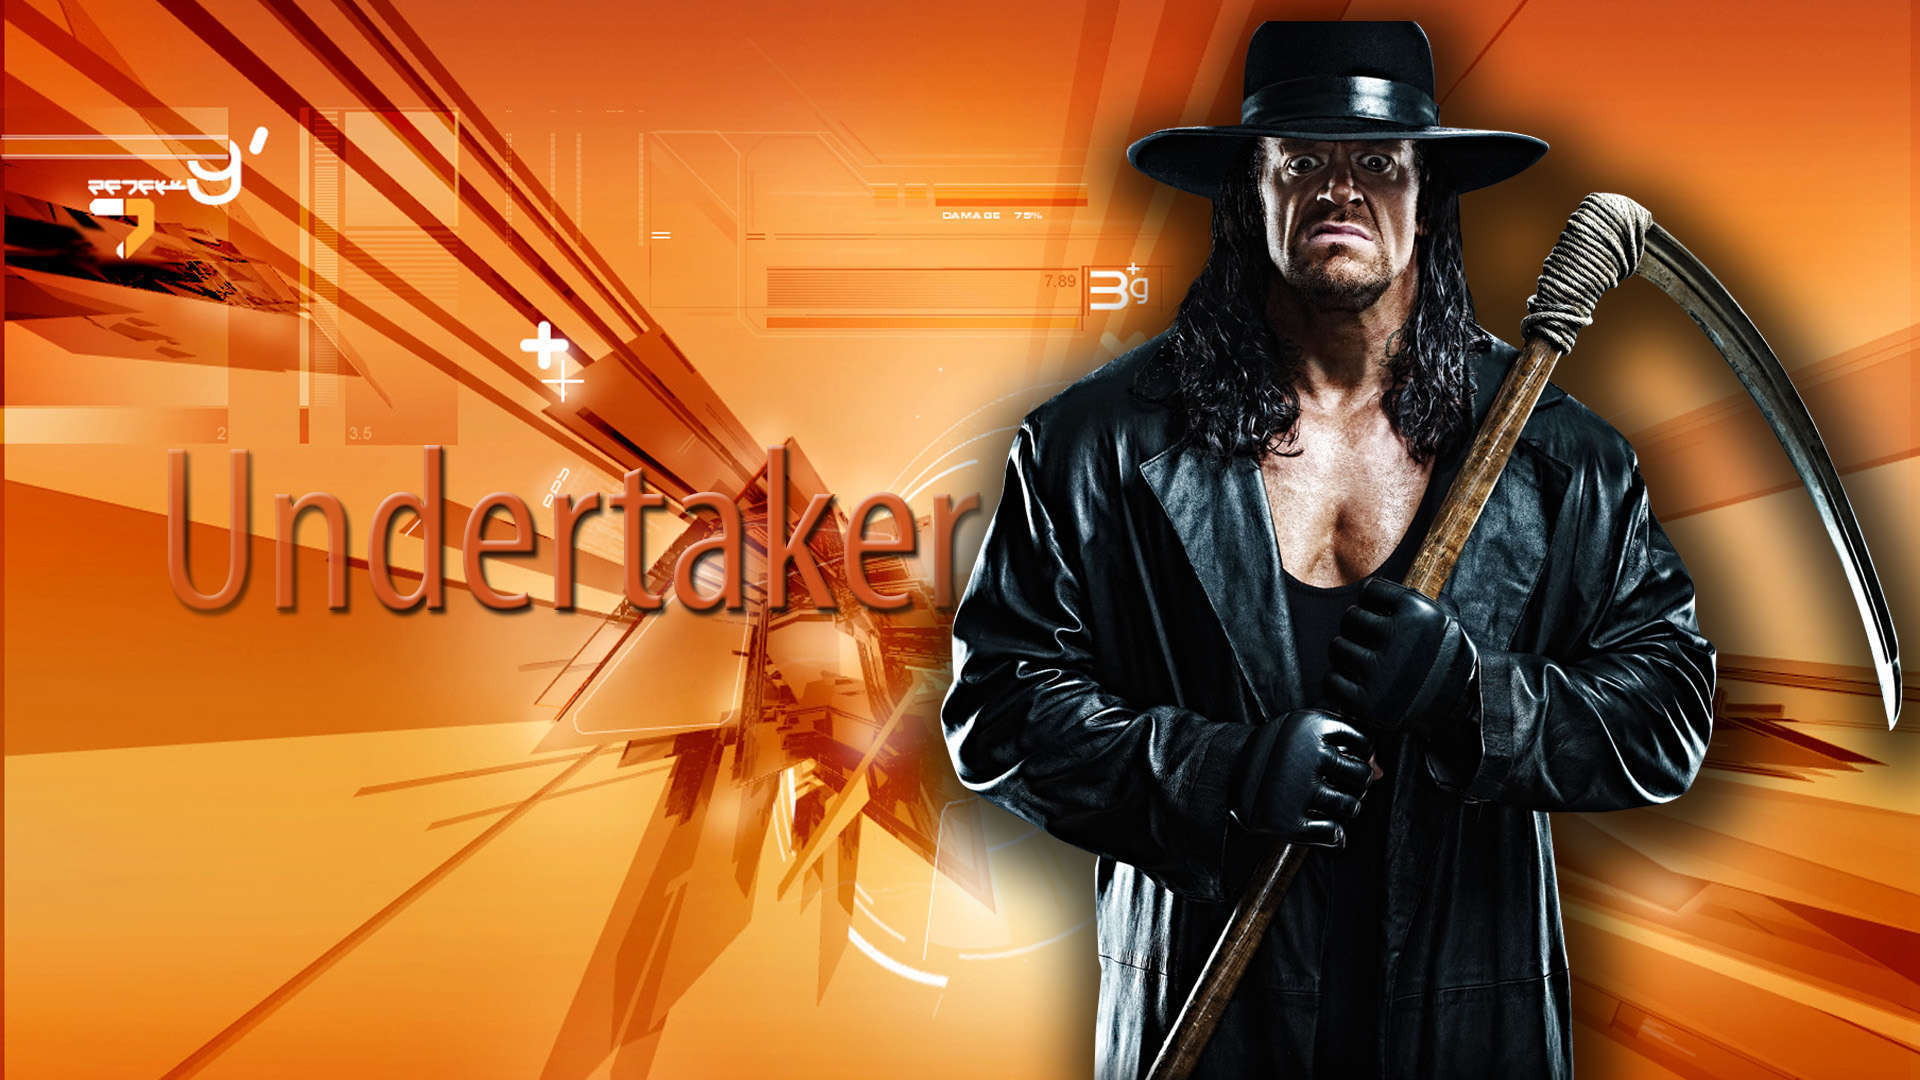 Wallpaper Undertaker HD 1080p Upload At July By